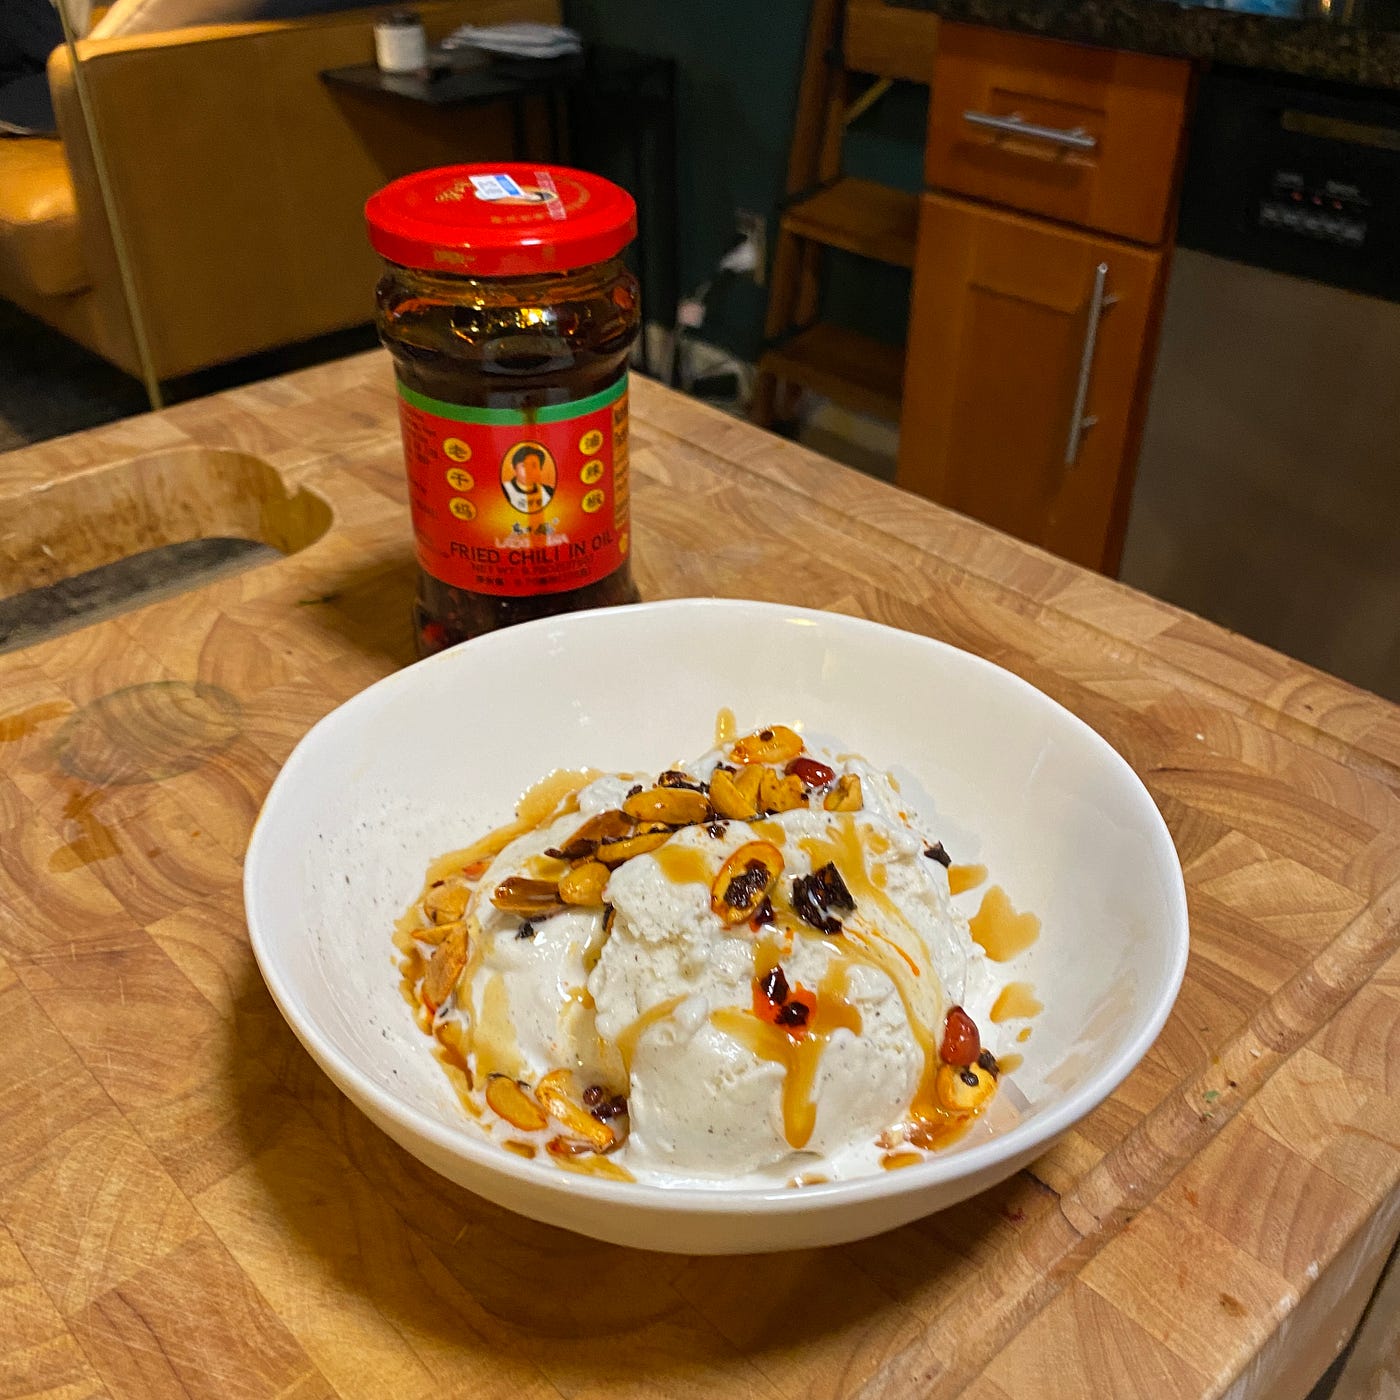 Lao Gan Ma Is the Best Chile Sauce and Oil: 2021 Review